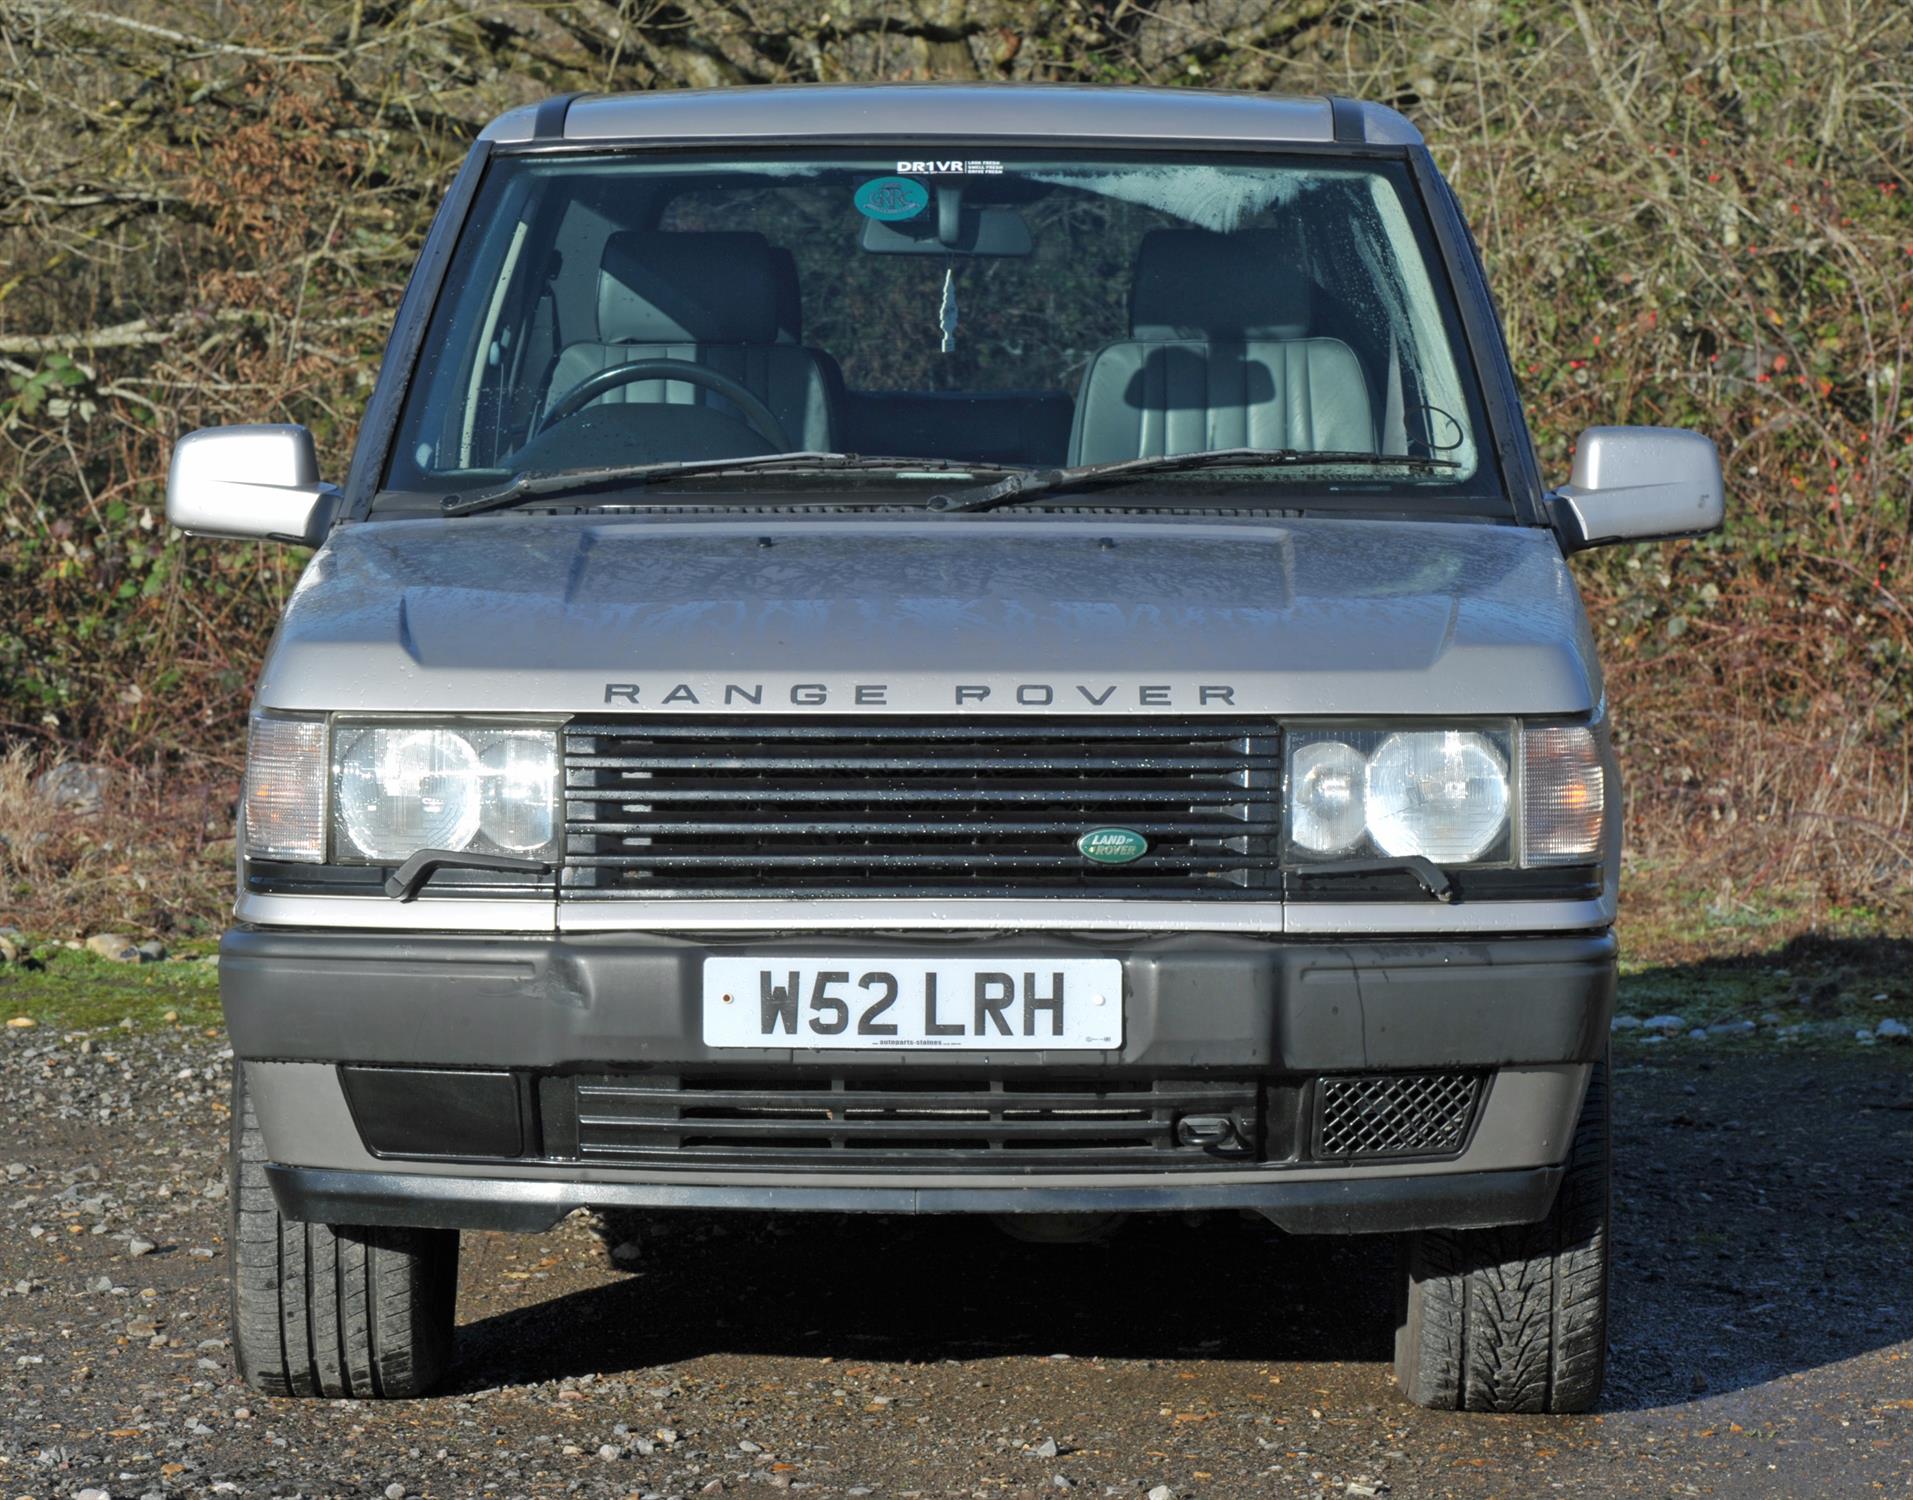 2000 Range Rover P38 2.5 DSE Diesel Automatic. Registration number: W52 LRH. 148, - Image 3 of 16